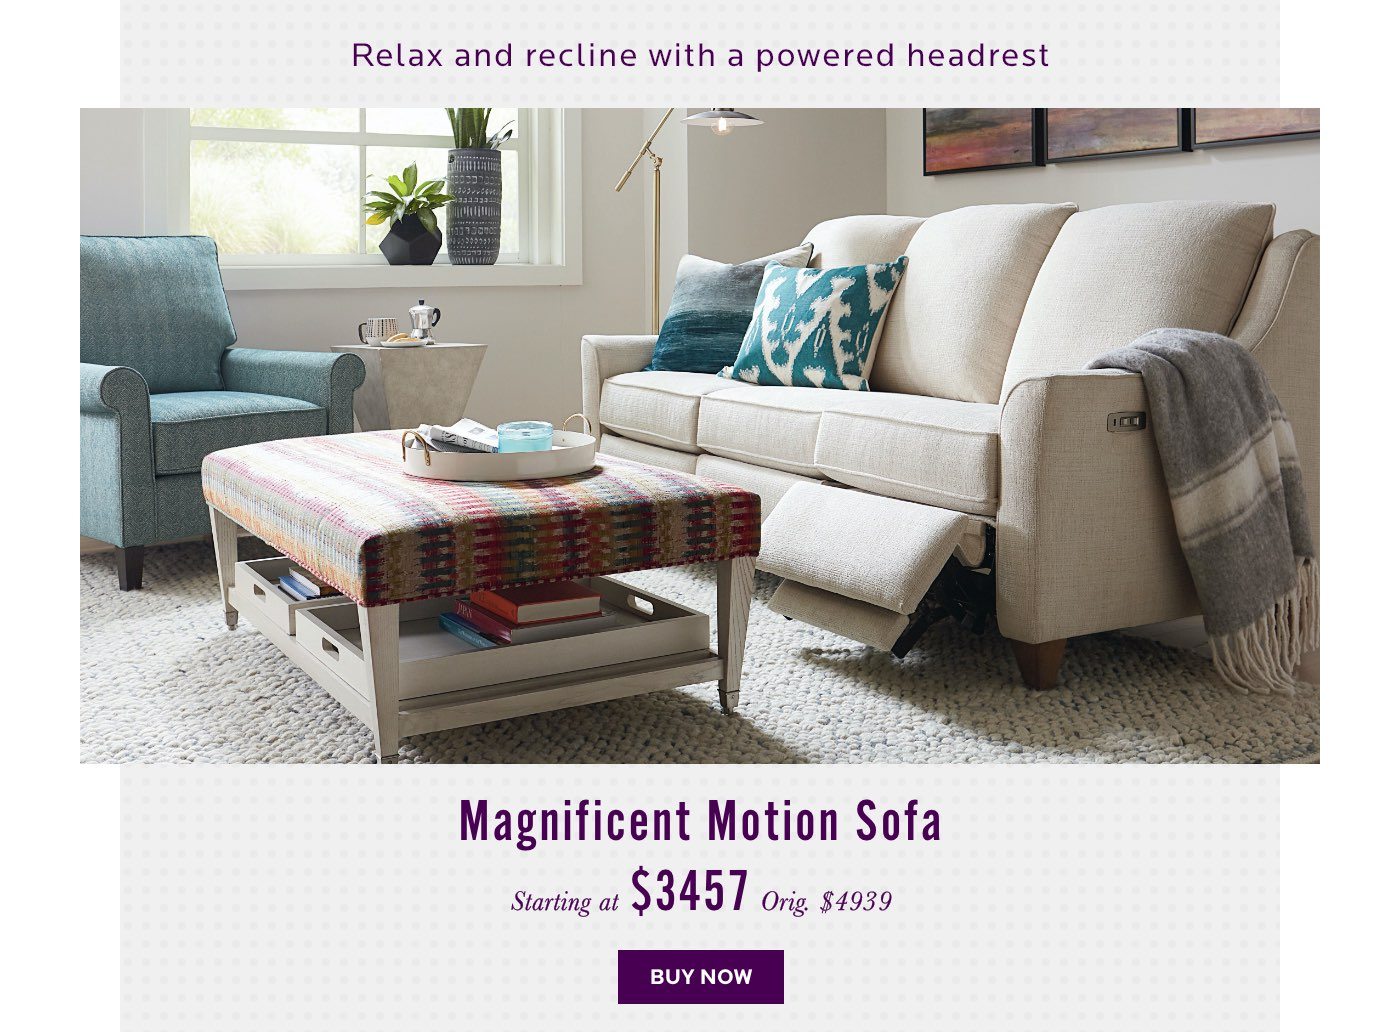 Magnificent Motion Sofa. Relax and recline with a powered headrest. Buy now.